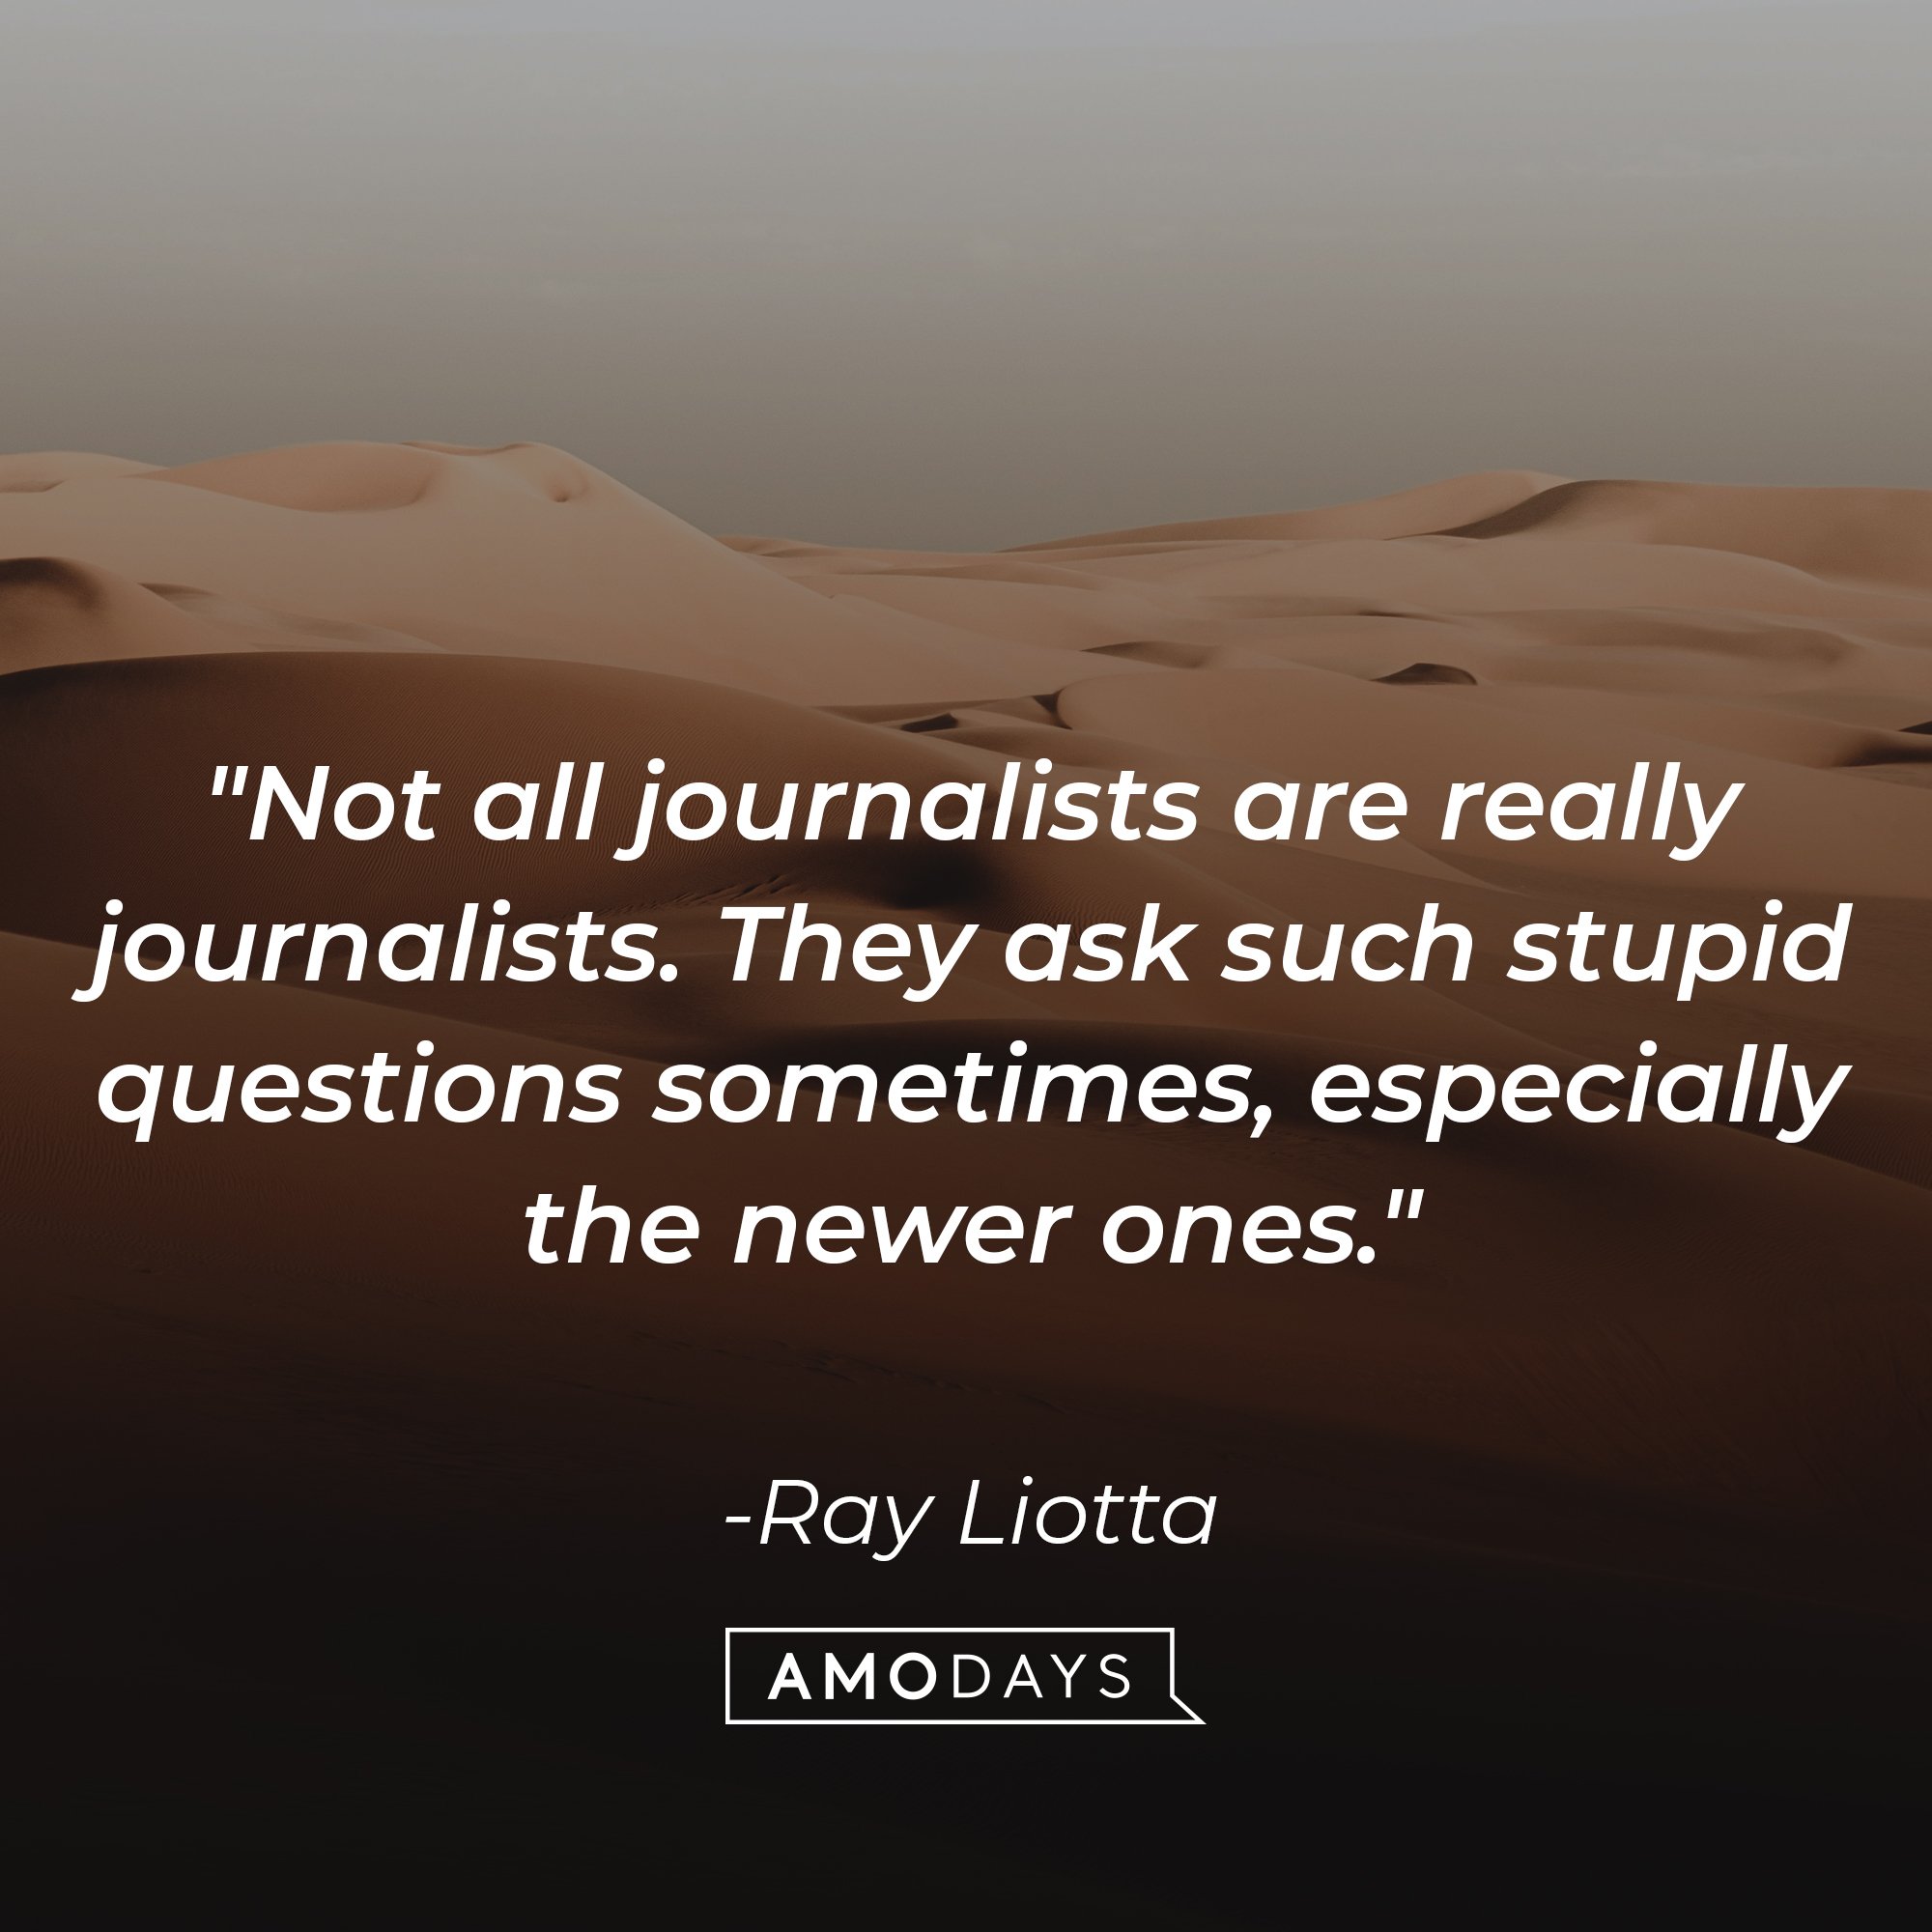 Ray Liotta’s quote: "Not all journalists are really journalists. They ask such stupid questions sometimes, especially the newer ones." | Image: AmoDays